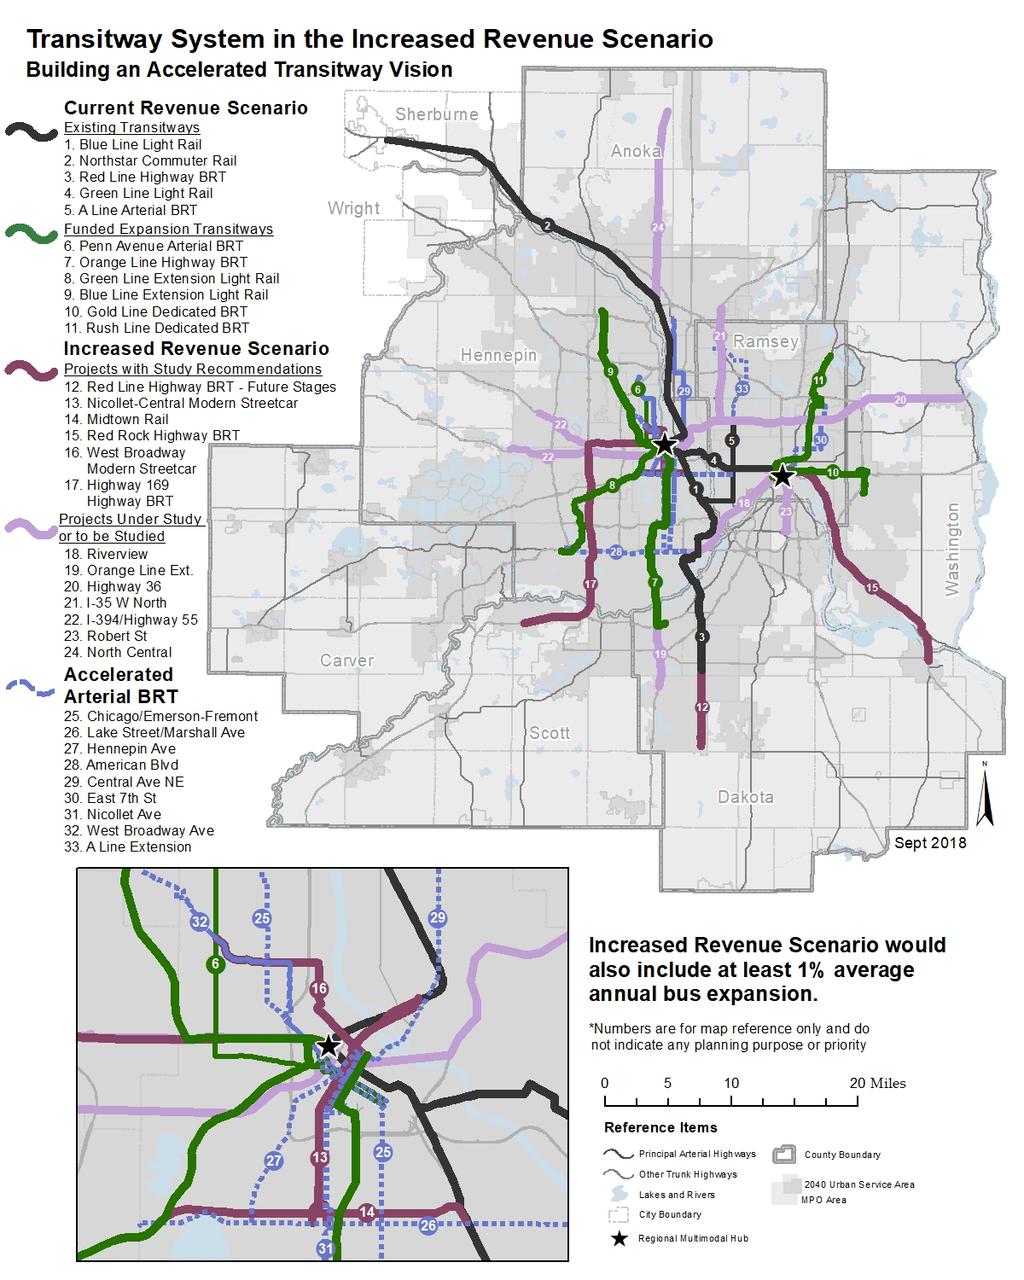 Figure 6-9: Map of Transitway System in an Increased Revenue Scenario Building an Accelerated Transitway Vision